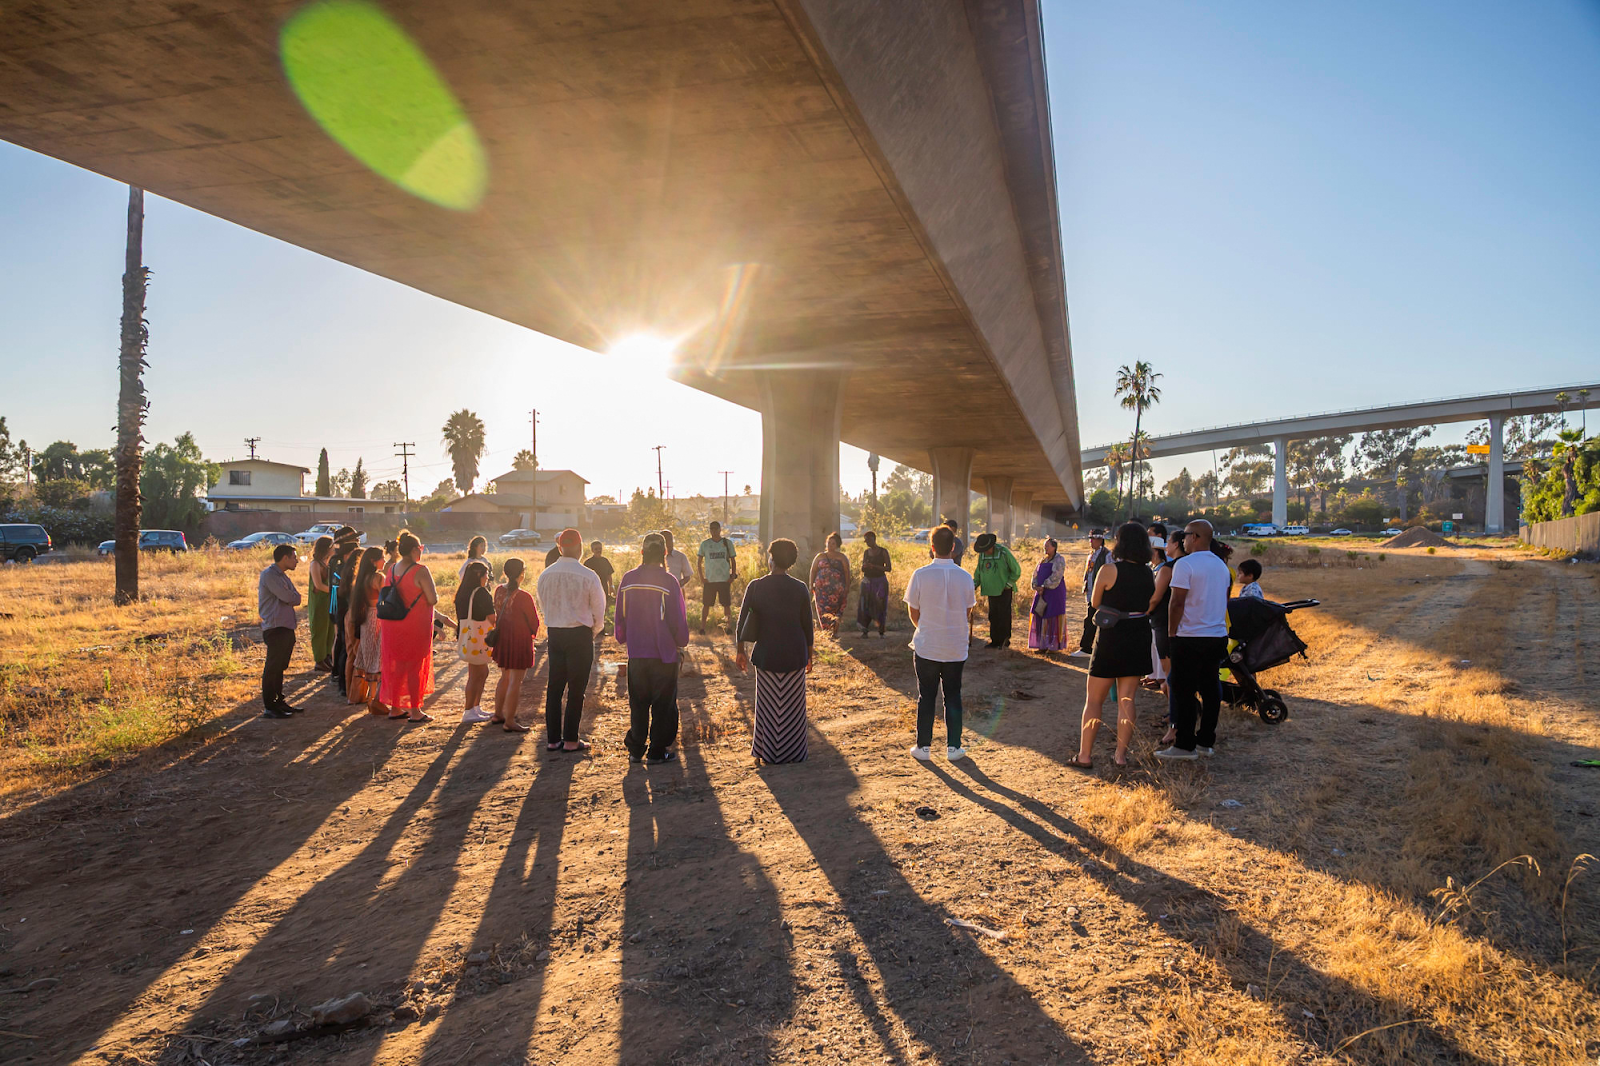 A group of people representing a range of ages, genders, and ethnicities, stands in a circle beneath a highway overpass, with the sun rising in the background